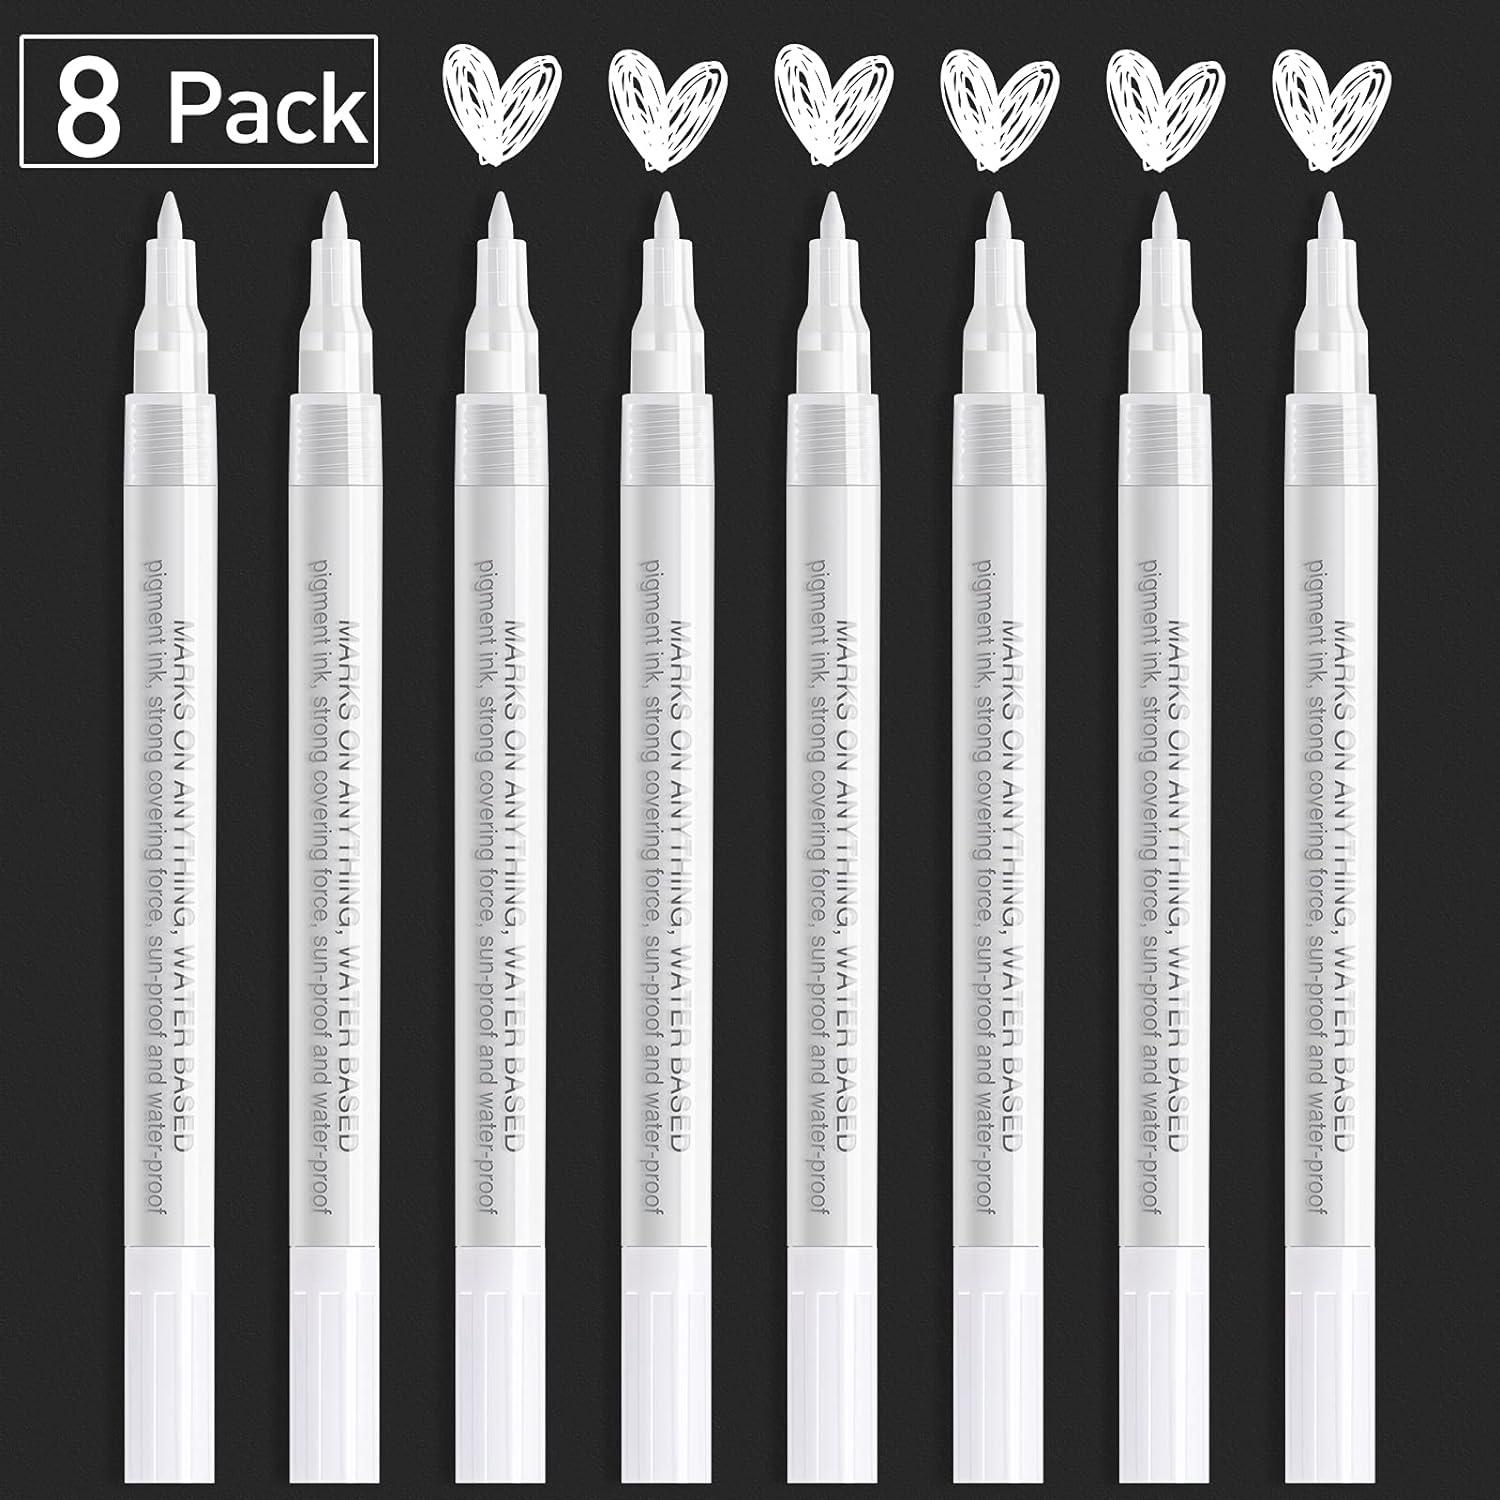  AKARUED White Paint Pen for Art - 8 Pack Acrylic White Paint  Marker for Black Paper, Rock, Stone, Wood, Canvas, Glass, Metal, Metallic,  Ceramic, Graffiti, Drawing, Water-Based Paint Markers Sets 